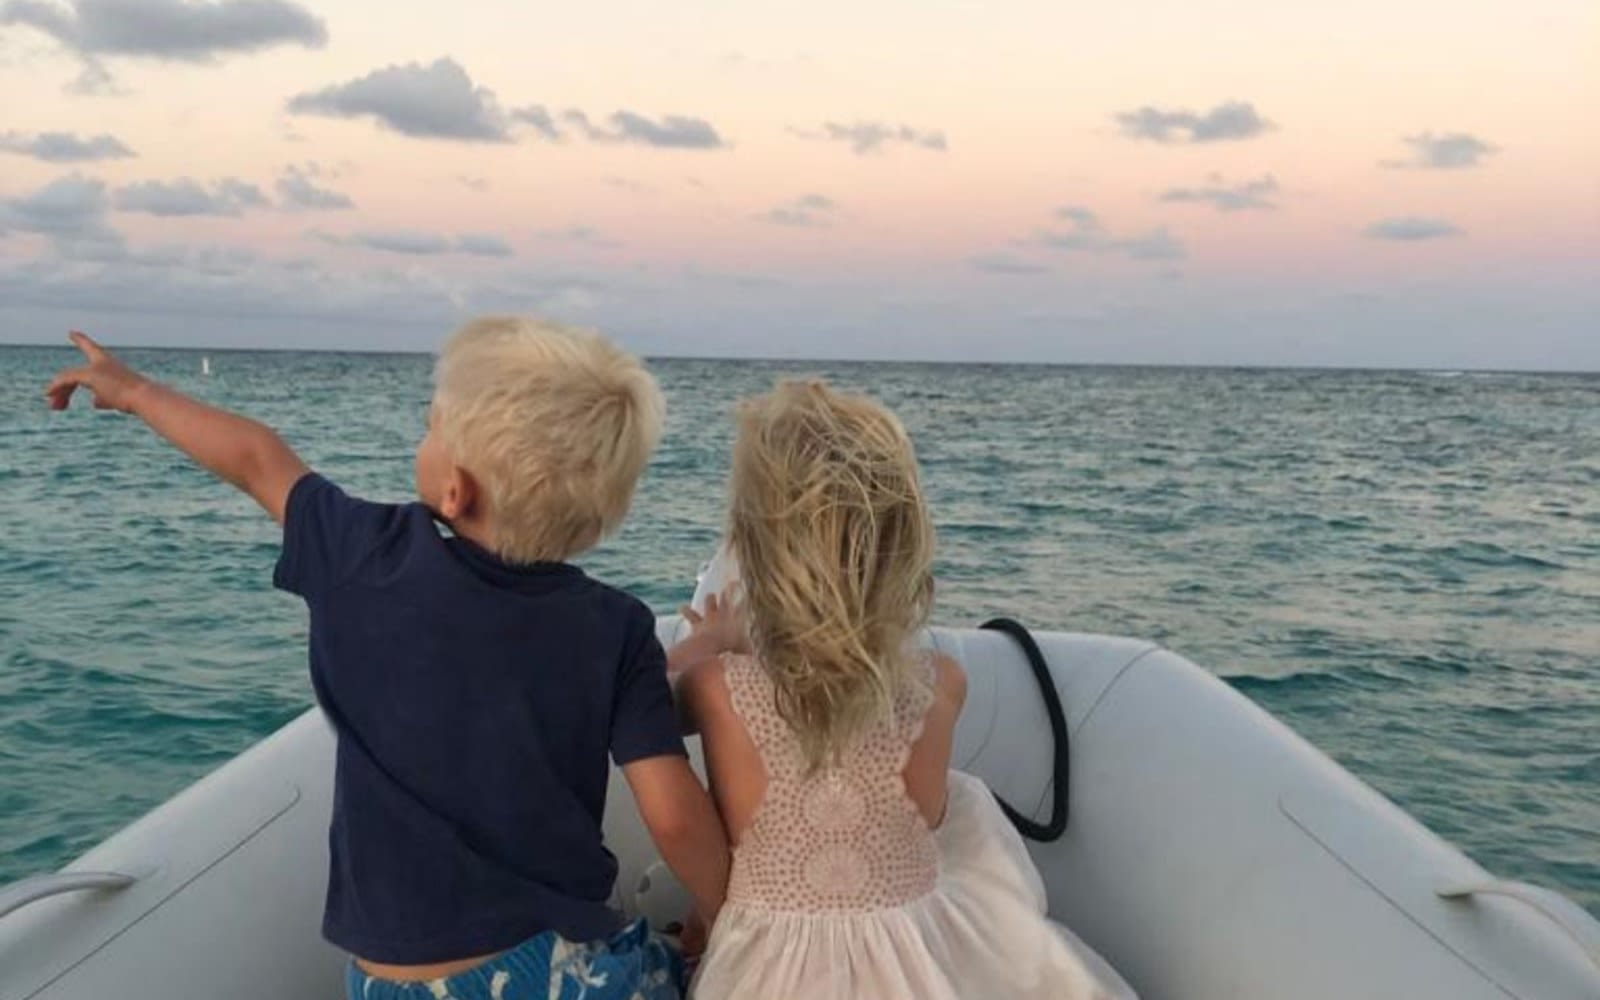 Etta and Artie in a boat with the ocean and horizon in front of them, backs to the camera. Artie is pointing to the left of the image.